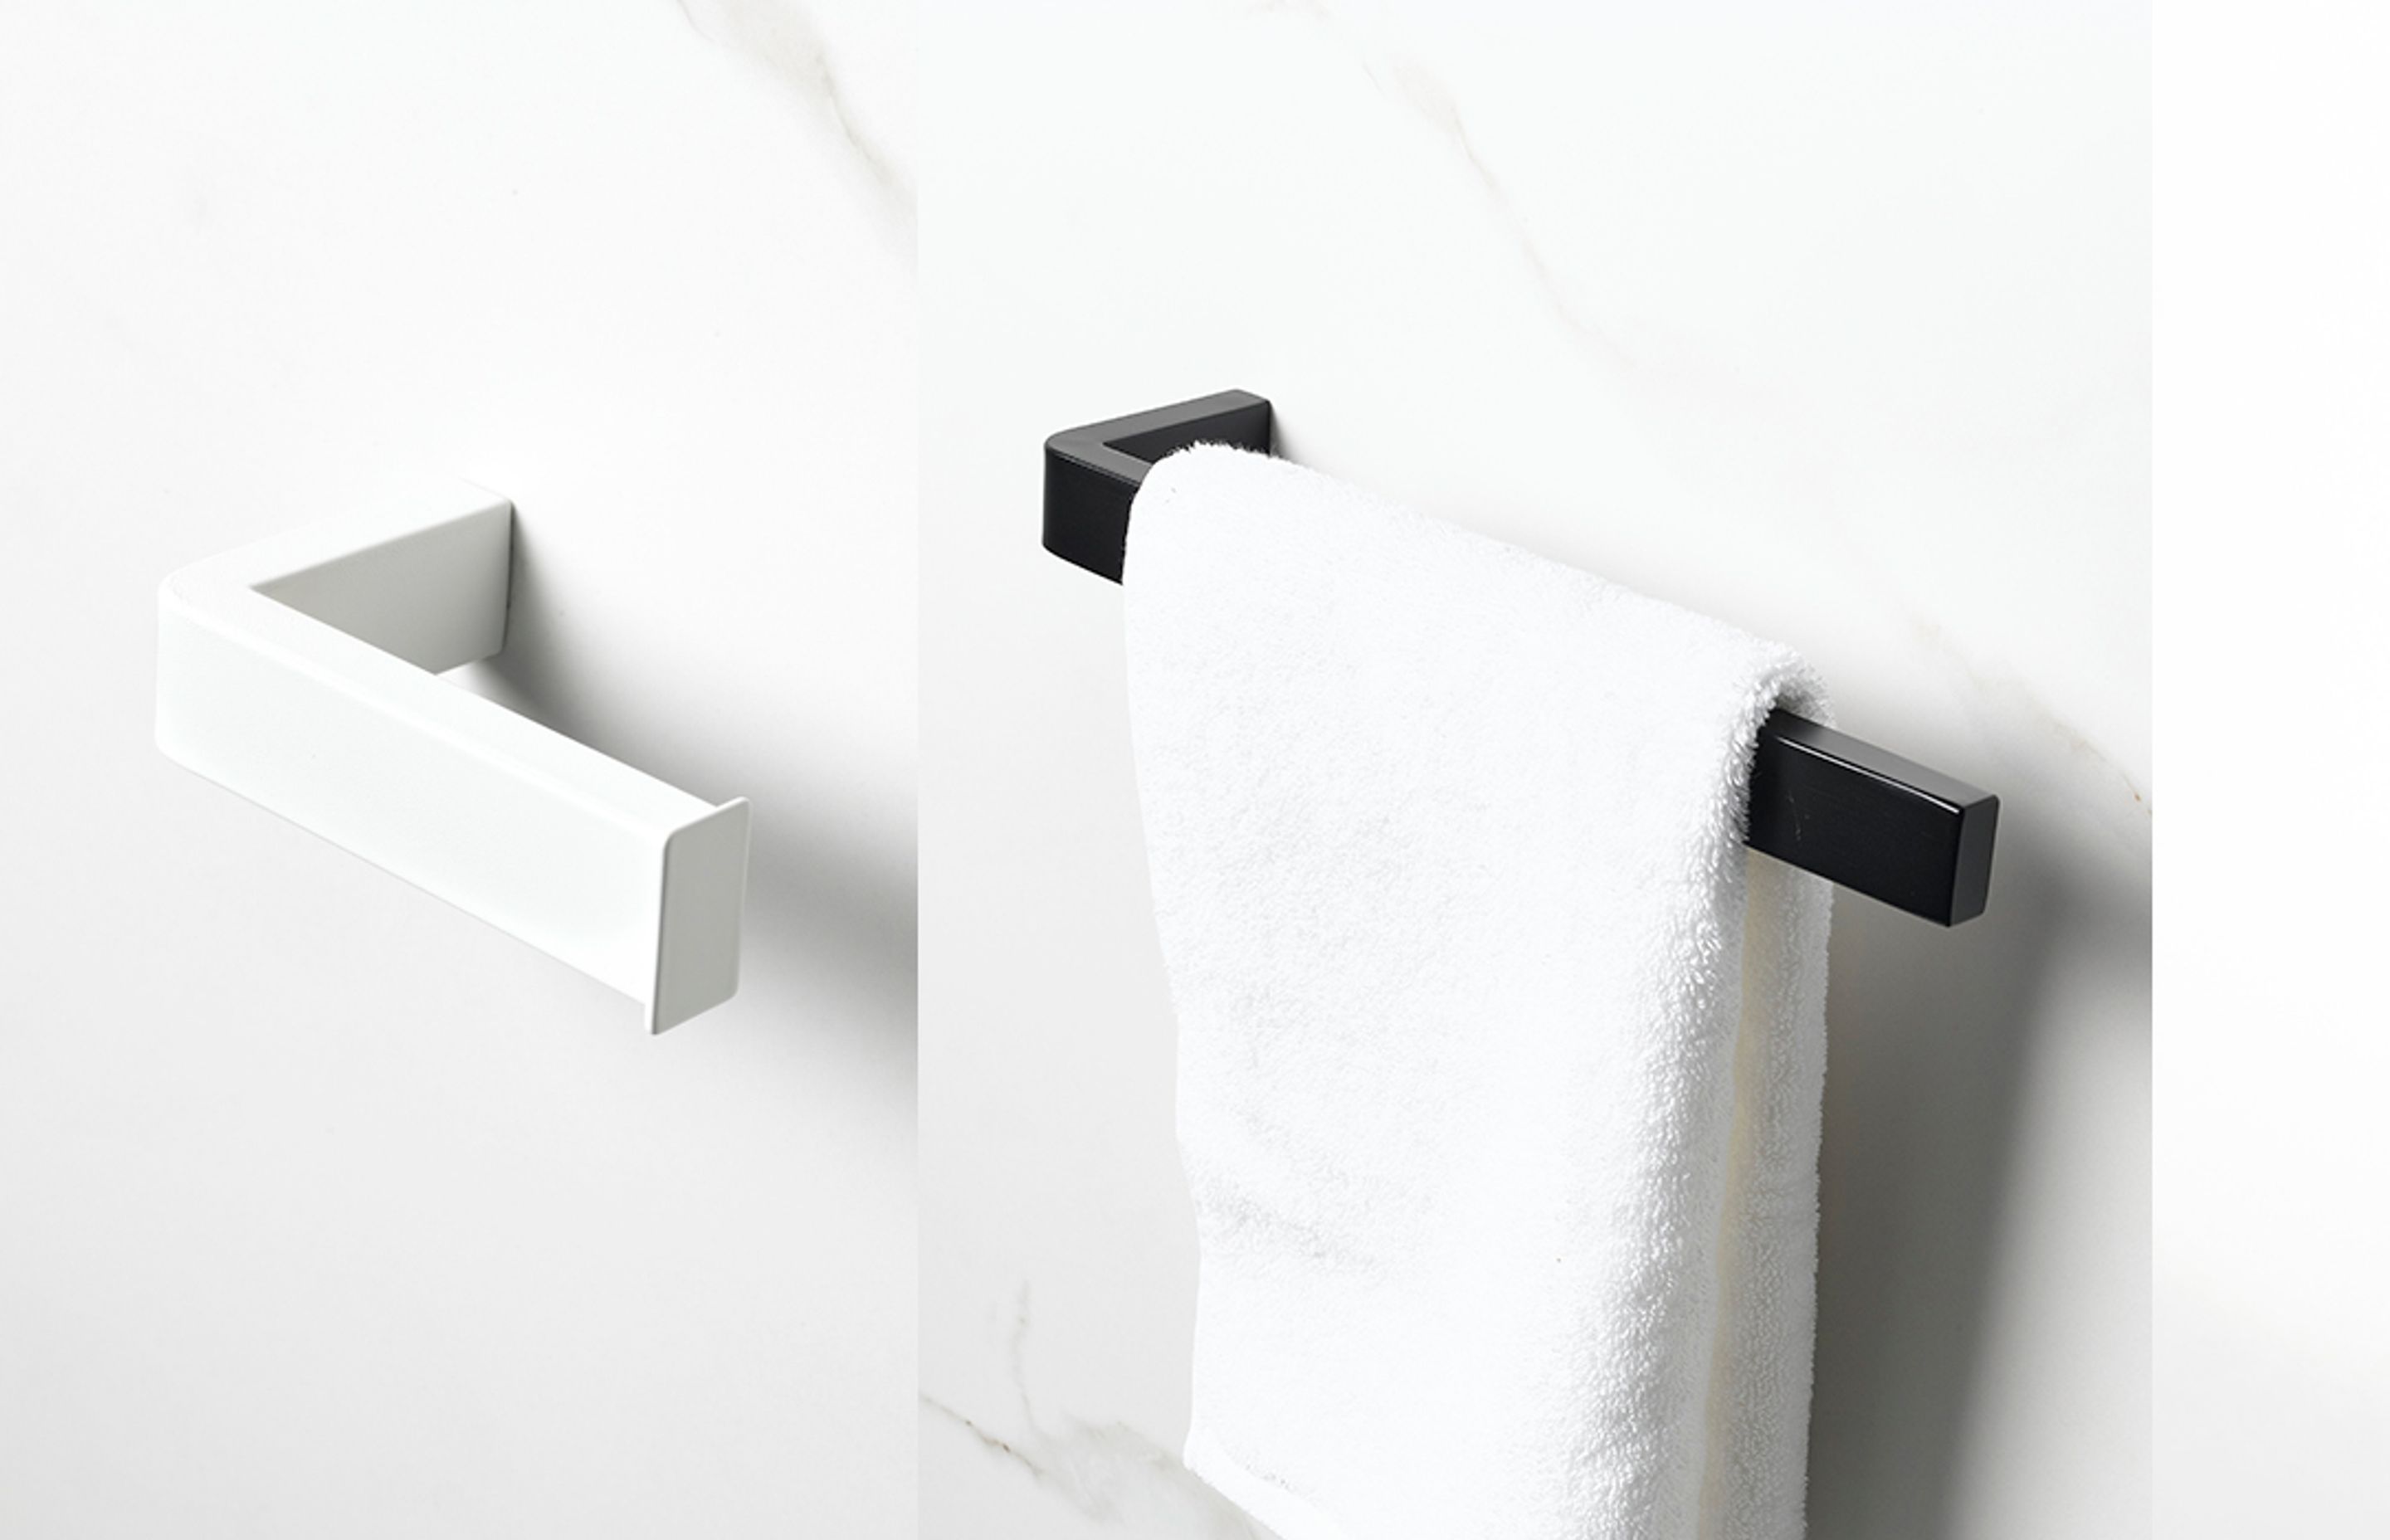 The new Icona range also features matching accessories, including a toilet roll holder, hand towel rail and robe hook, so homeowners can create a cohesive bathroom design.